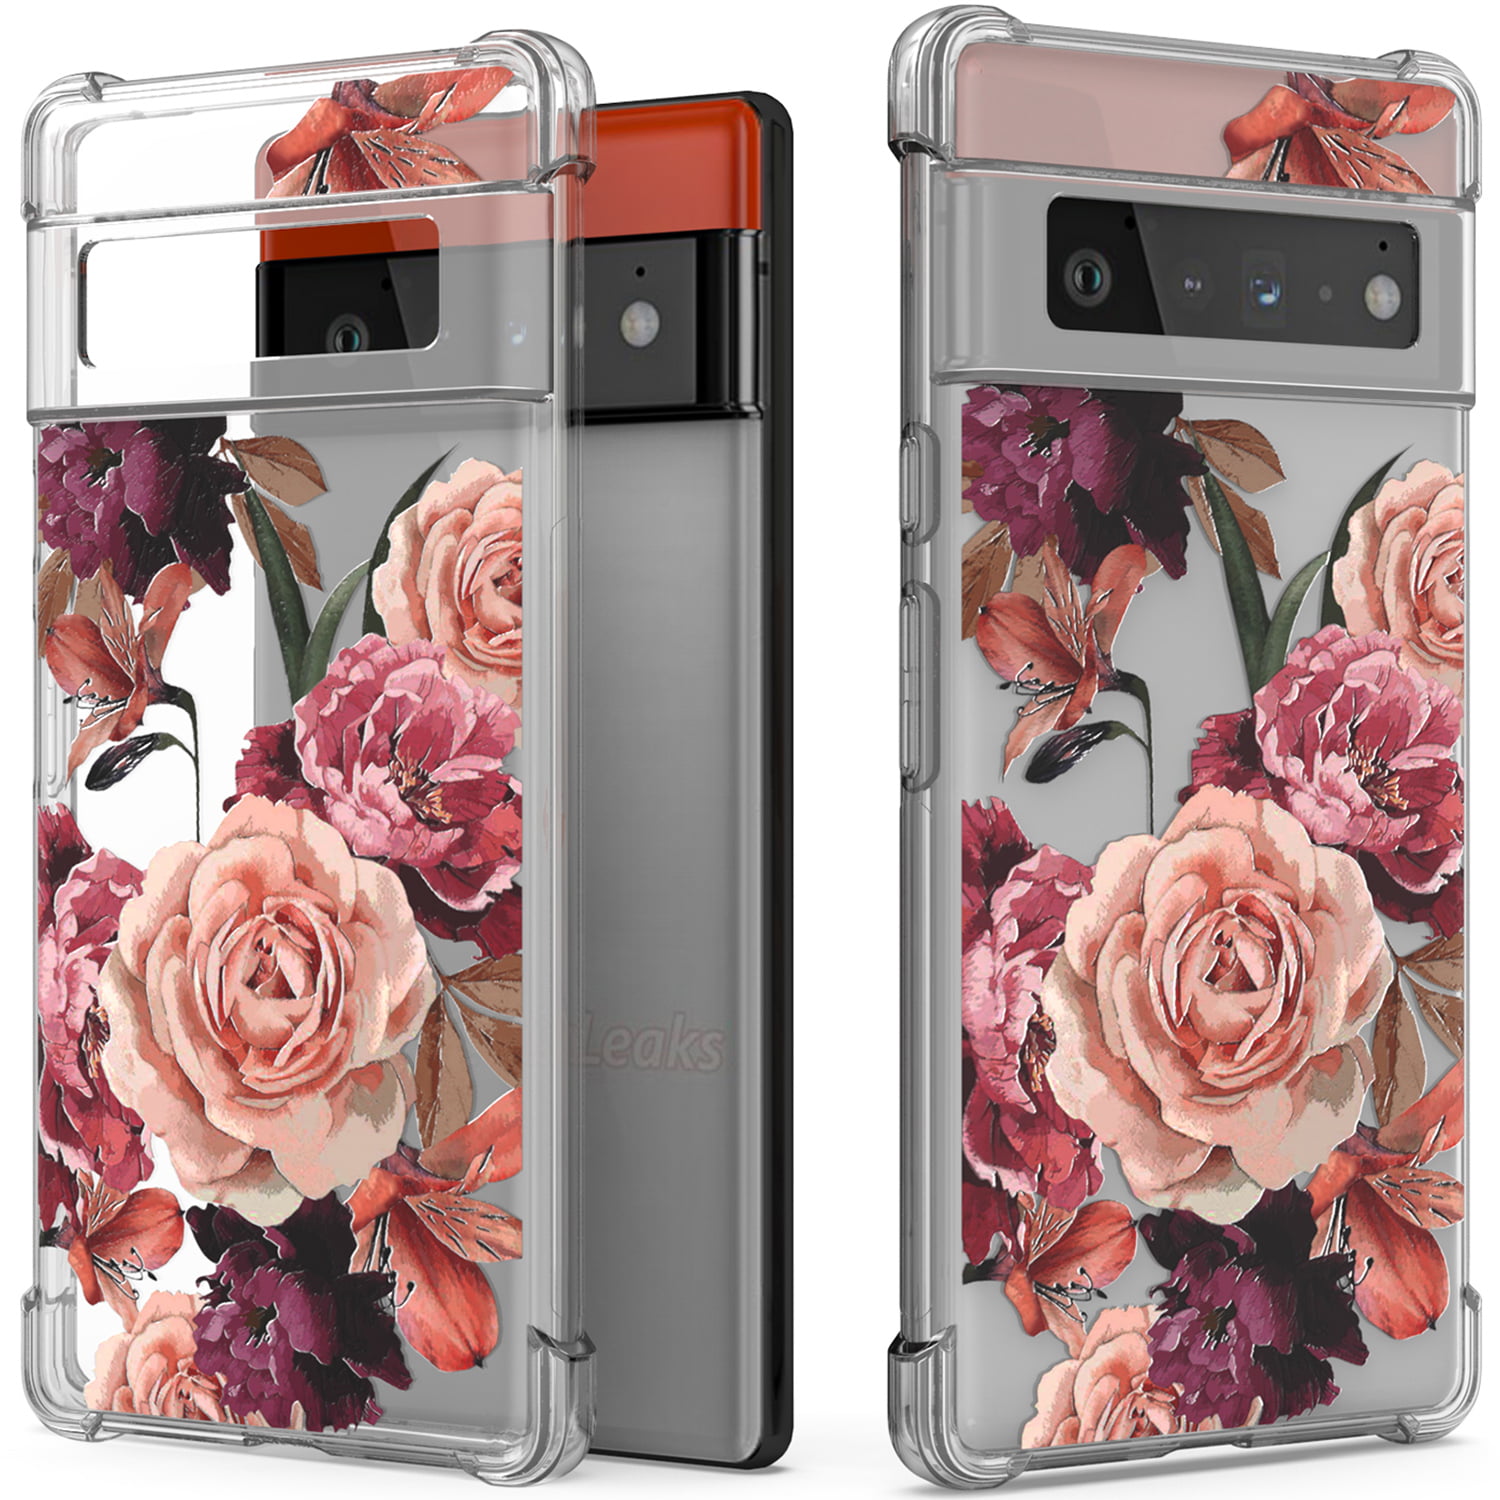 Vintage Flower Theme Print Mobile Phone Case Cover For Google Pixel Series 